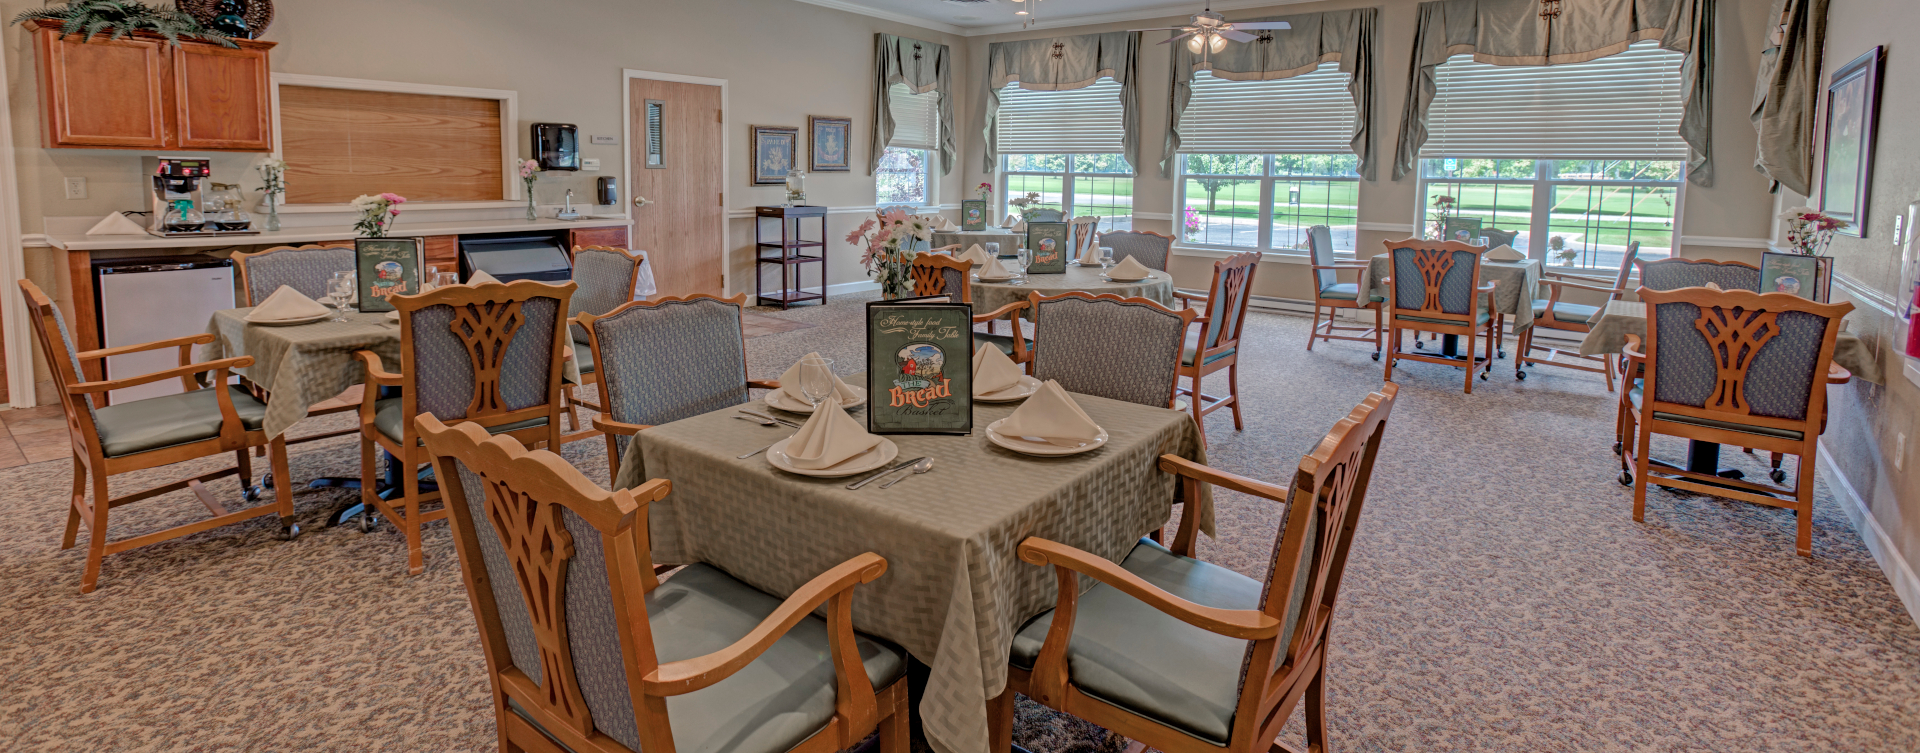 Enjoy restaurant -style meals served three times a day in our dining room at Bickford of Wabash